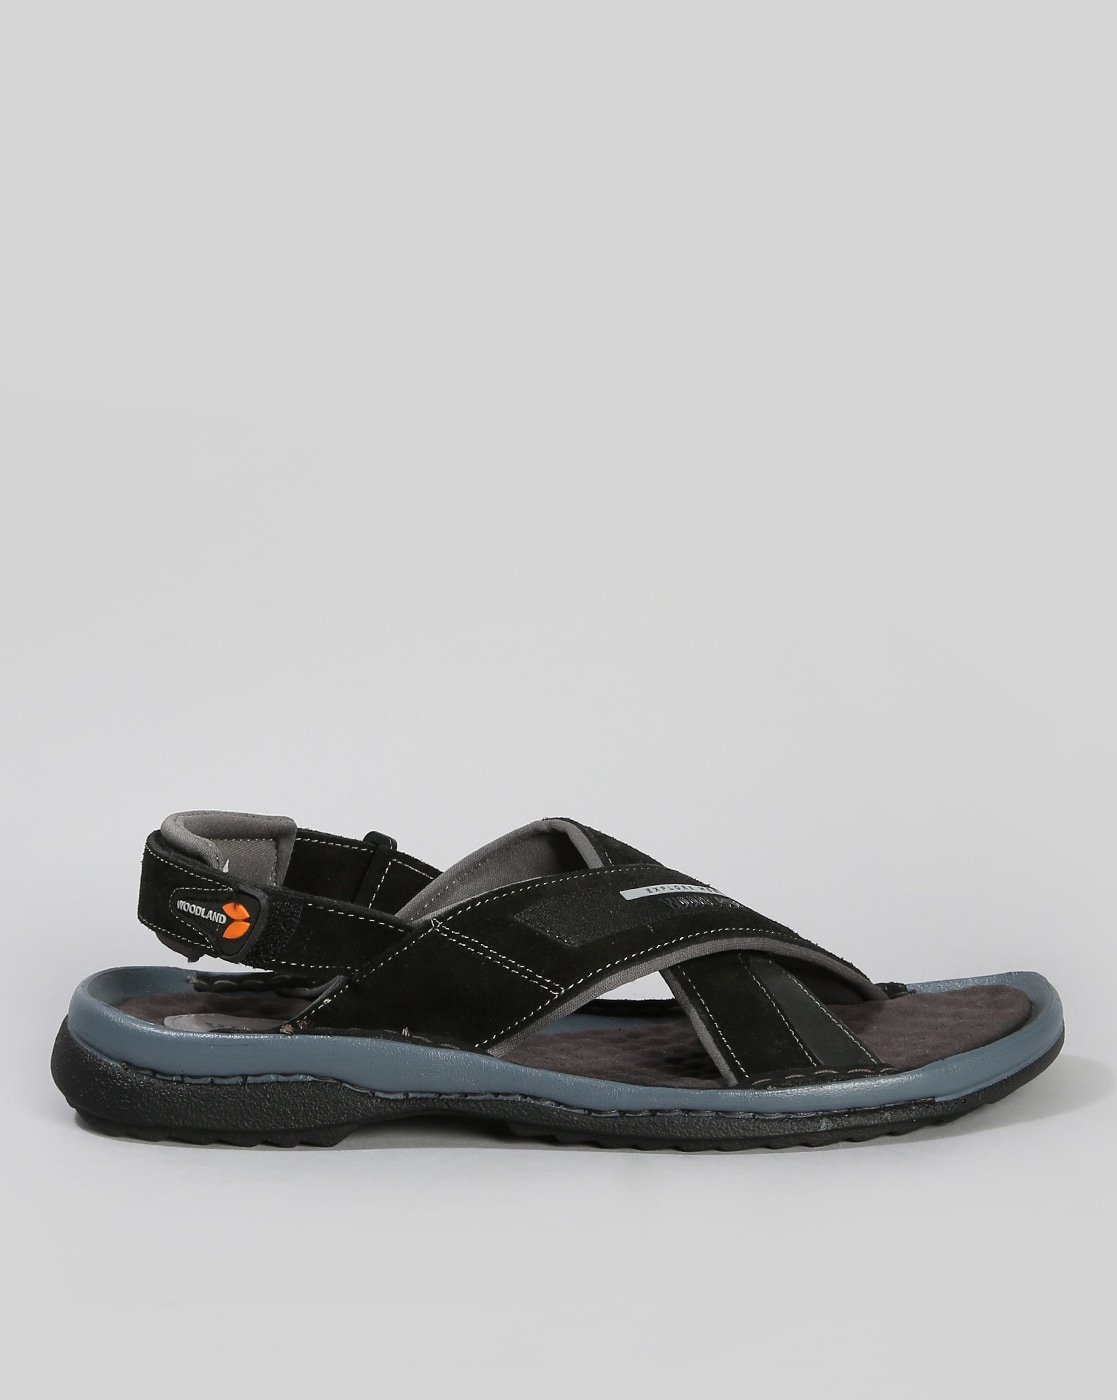 Buy The Latest Woodland Sandals for Men Online in India